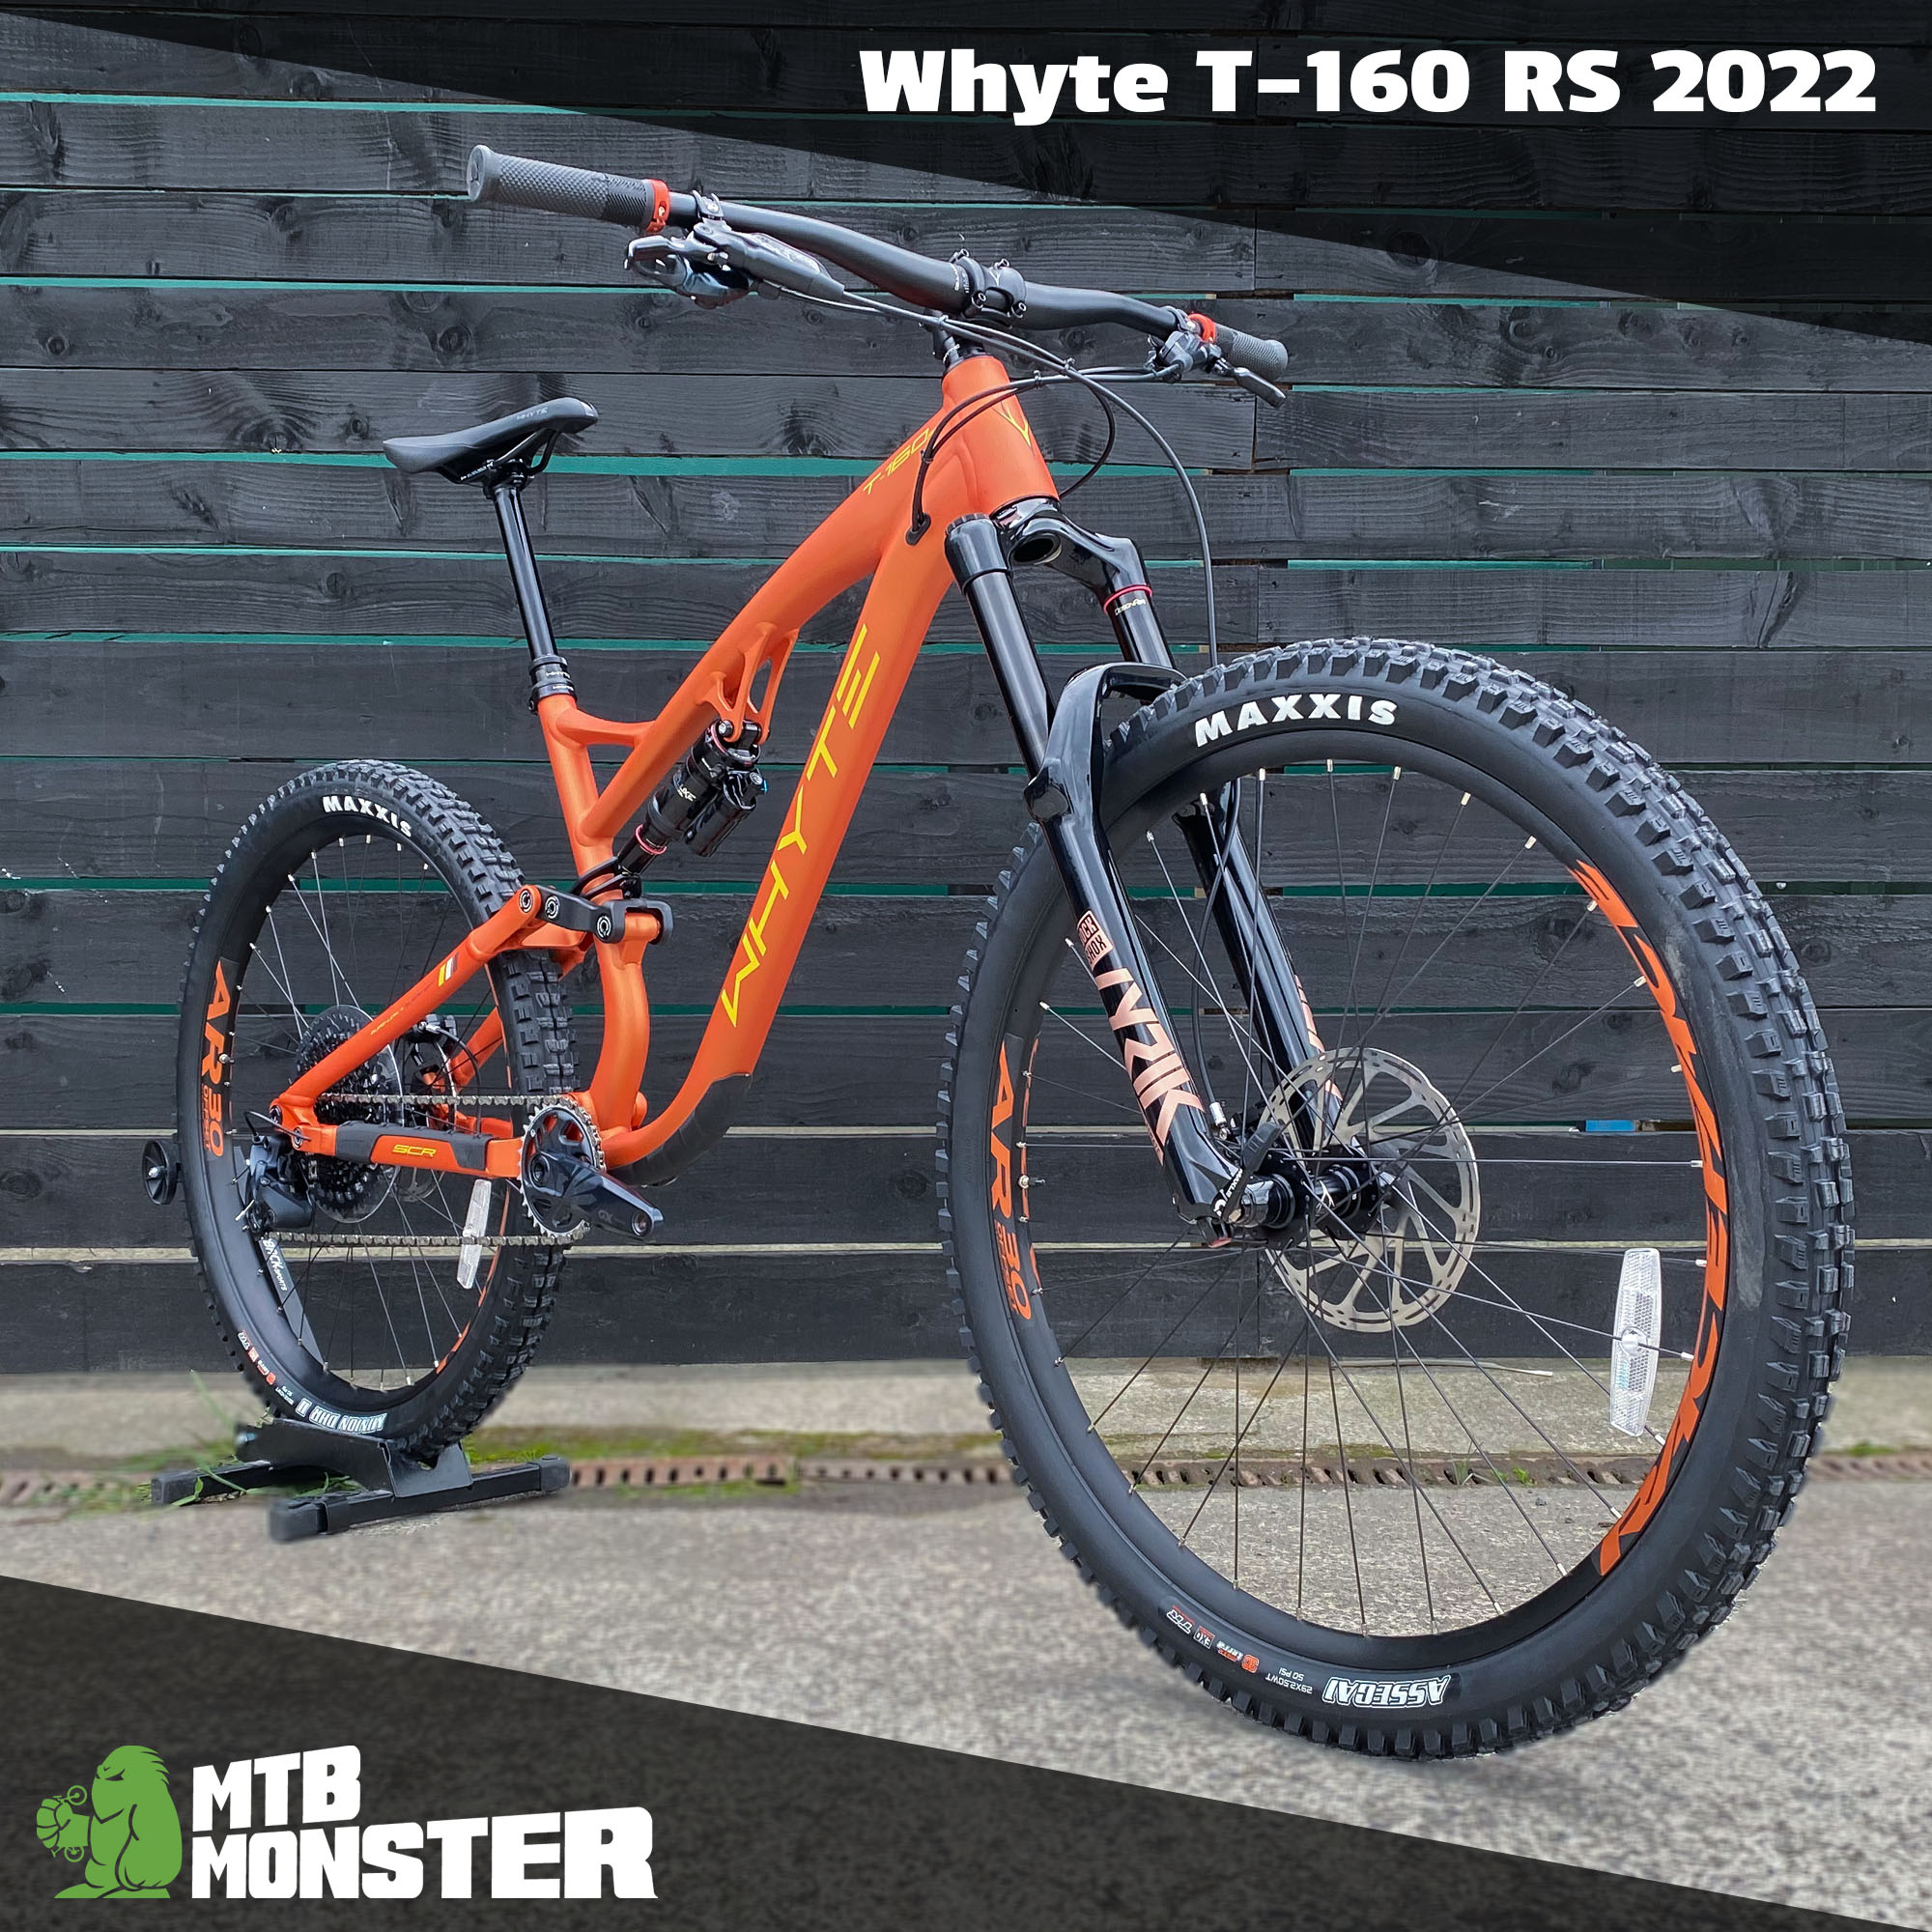 Whyte T-160 RS 2022